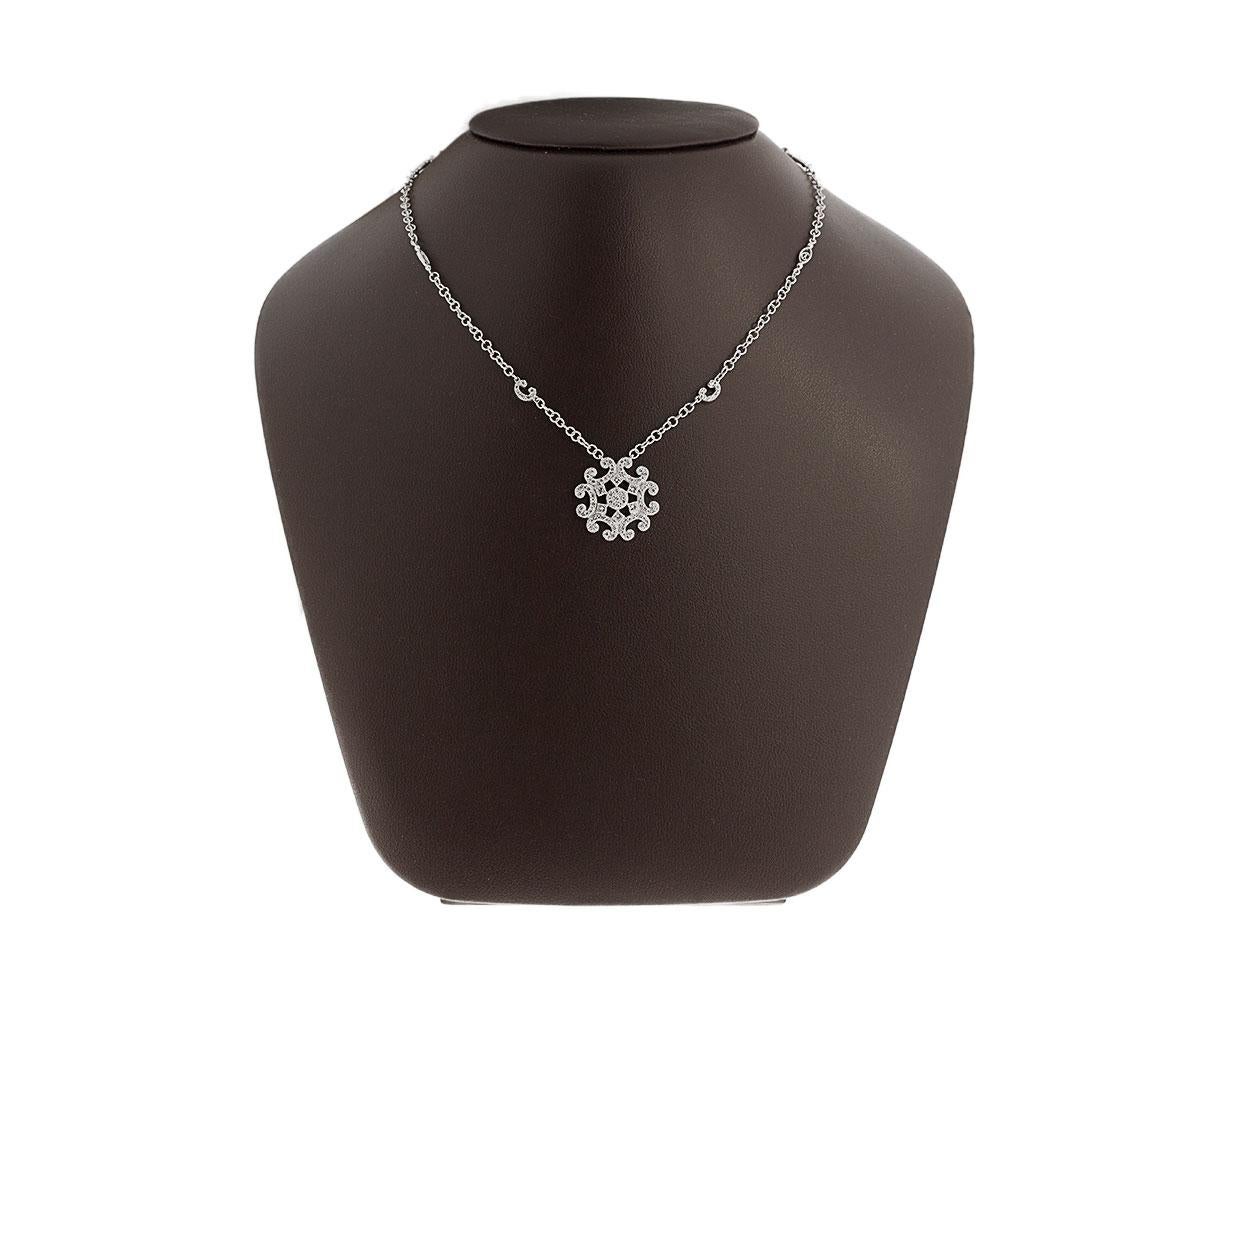 Item Details:
Brand: Charriol
Collection: Snowflake
Total Carat Weight (TCW) 0.75 ctw
Estimated Retail $7,000.00
Metal: 18K White Gold
Length: 16